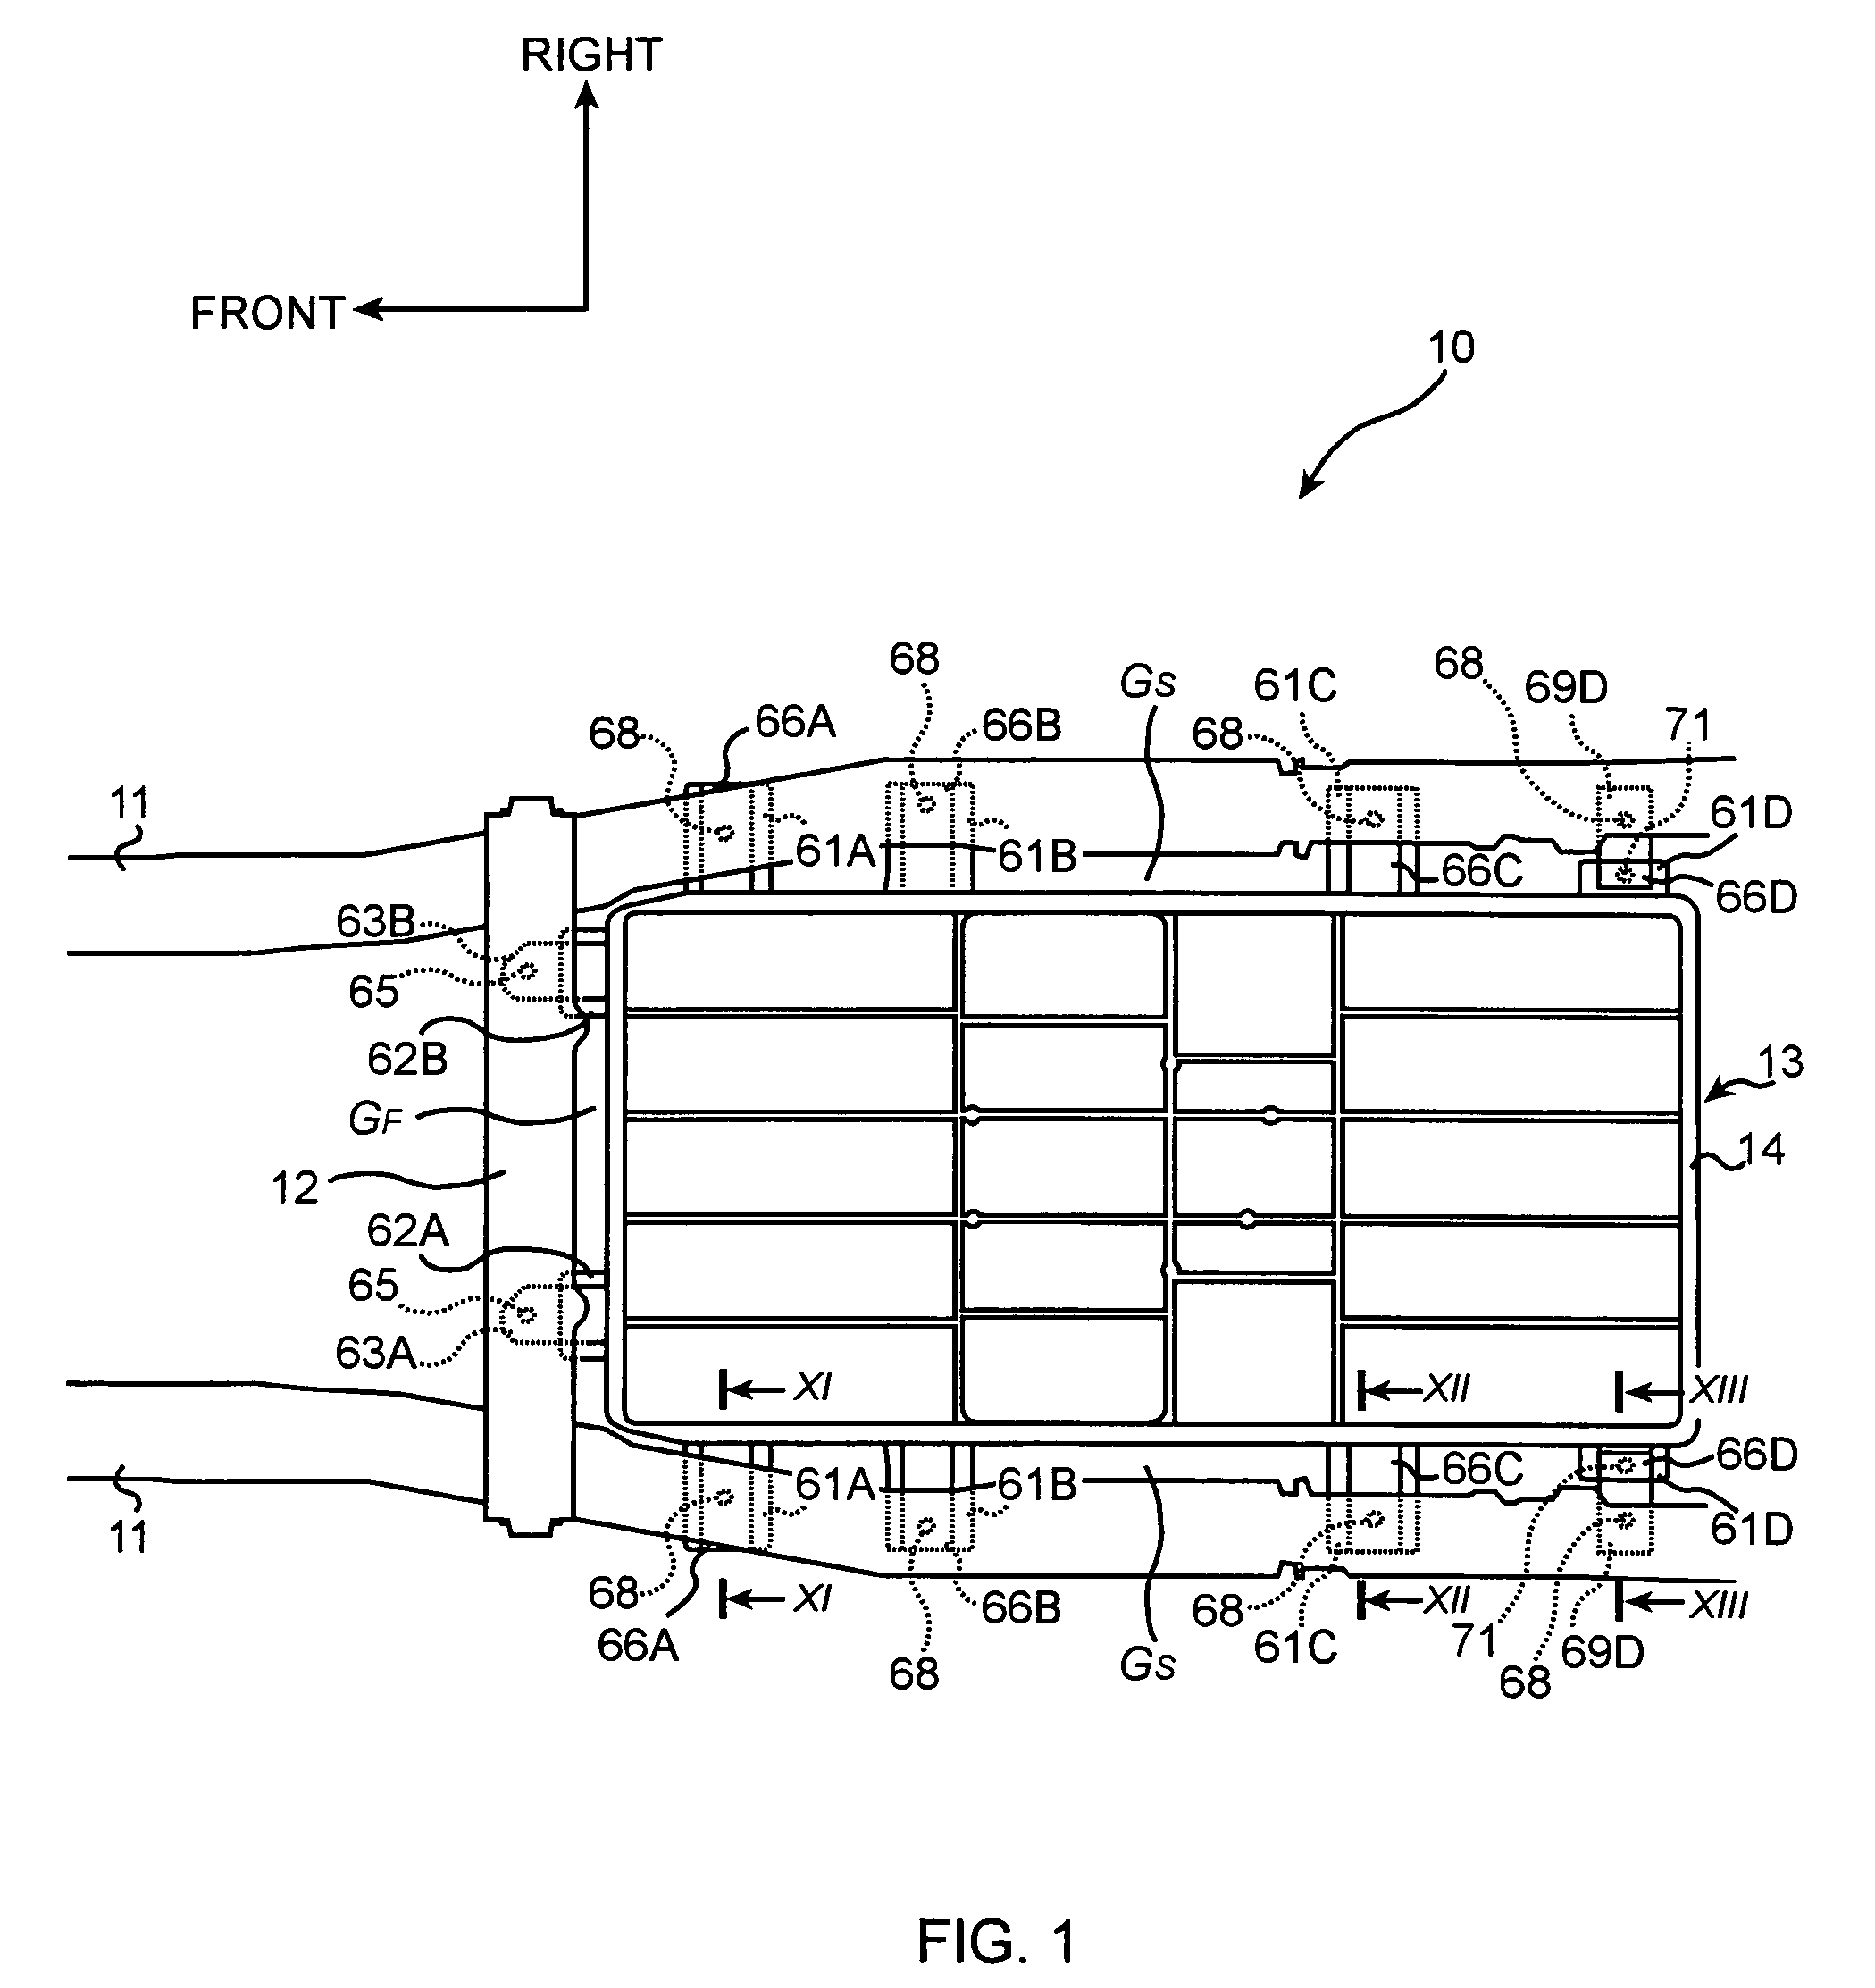 Structure for mounting batteries to electric vehicles